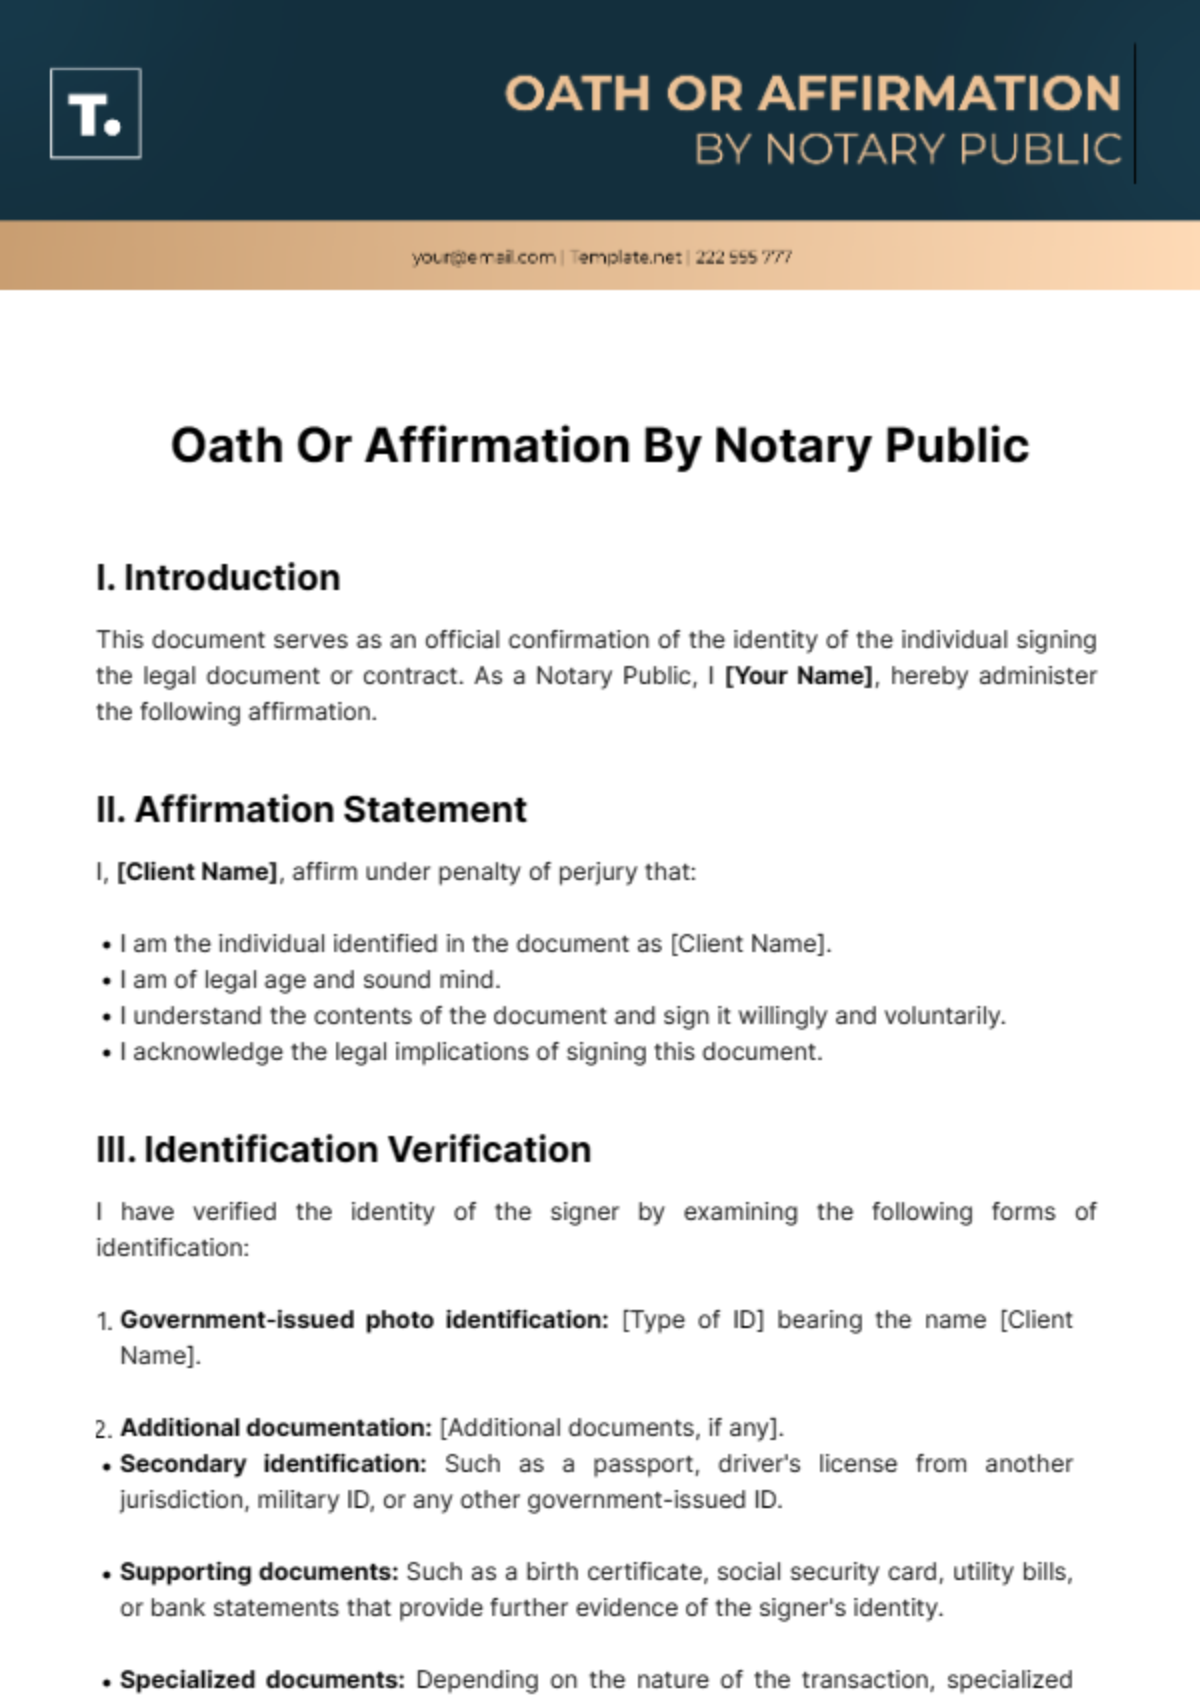 Free Oath Or Affirmation By Notary Public Template